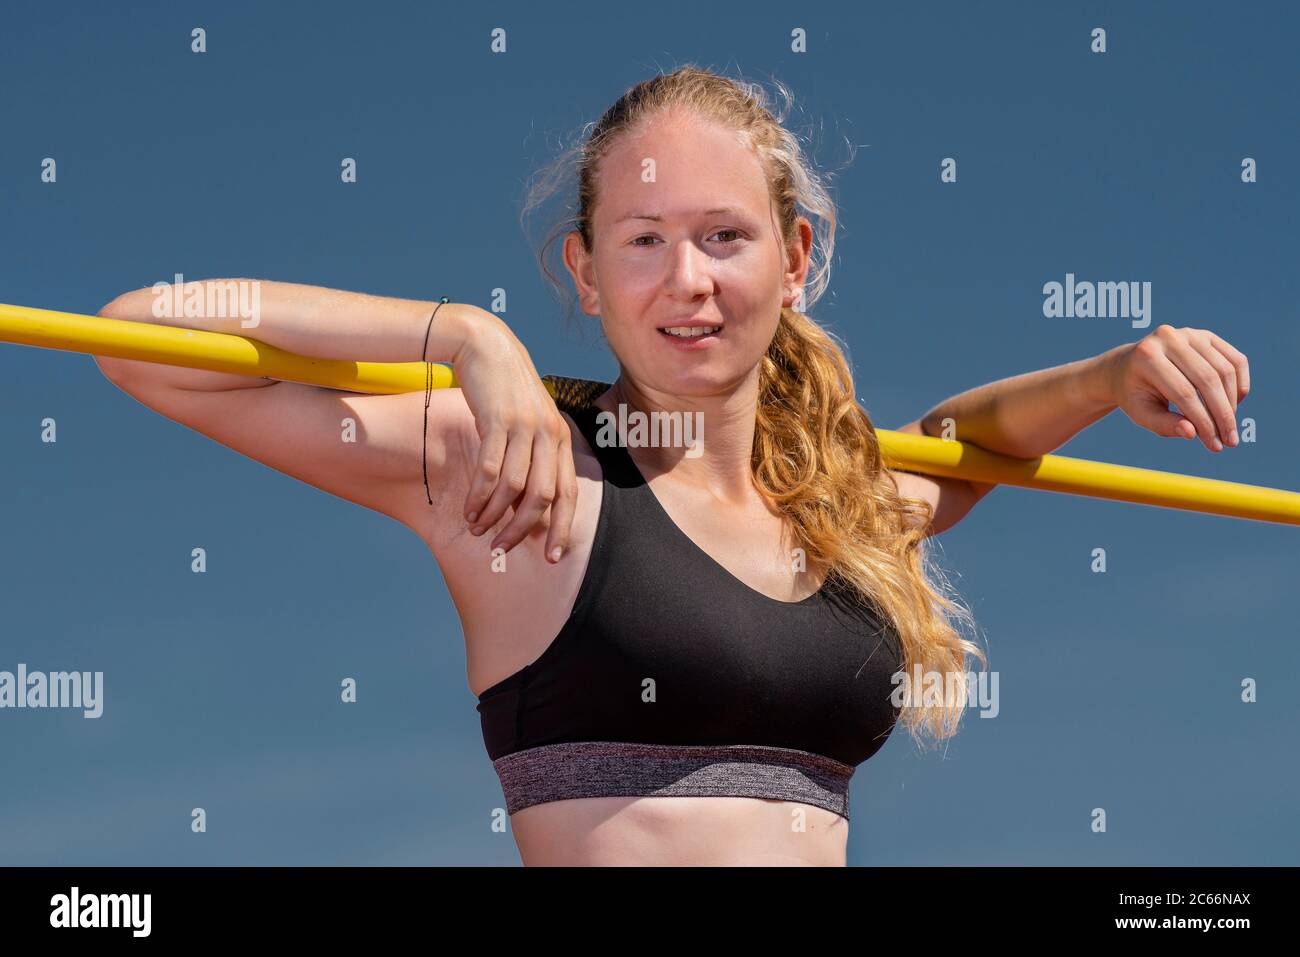 Woman, 21 years old, track and field, javelin throw Stock Photo